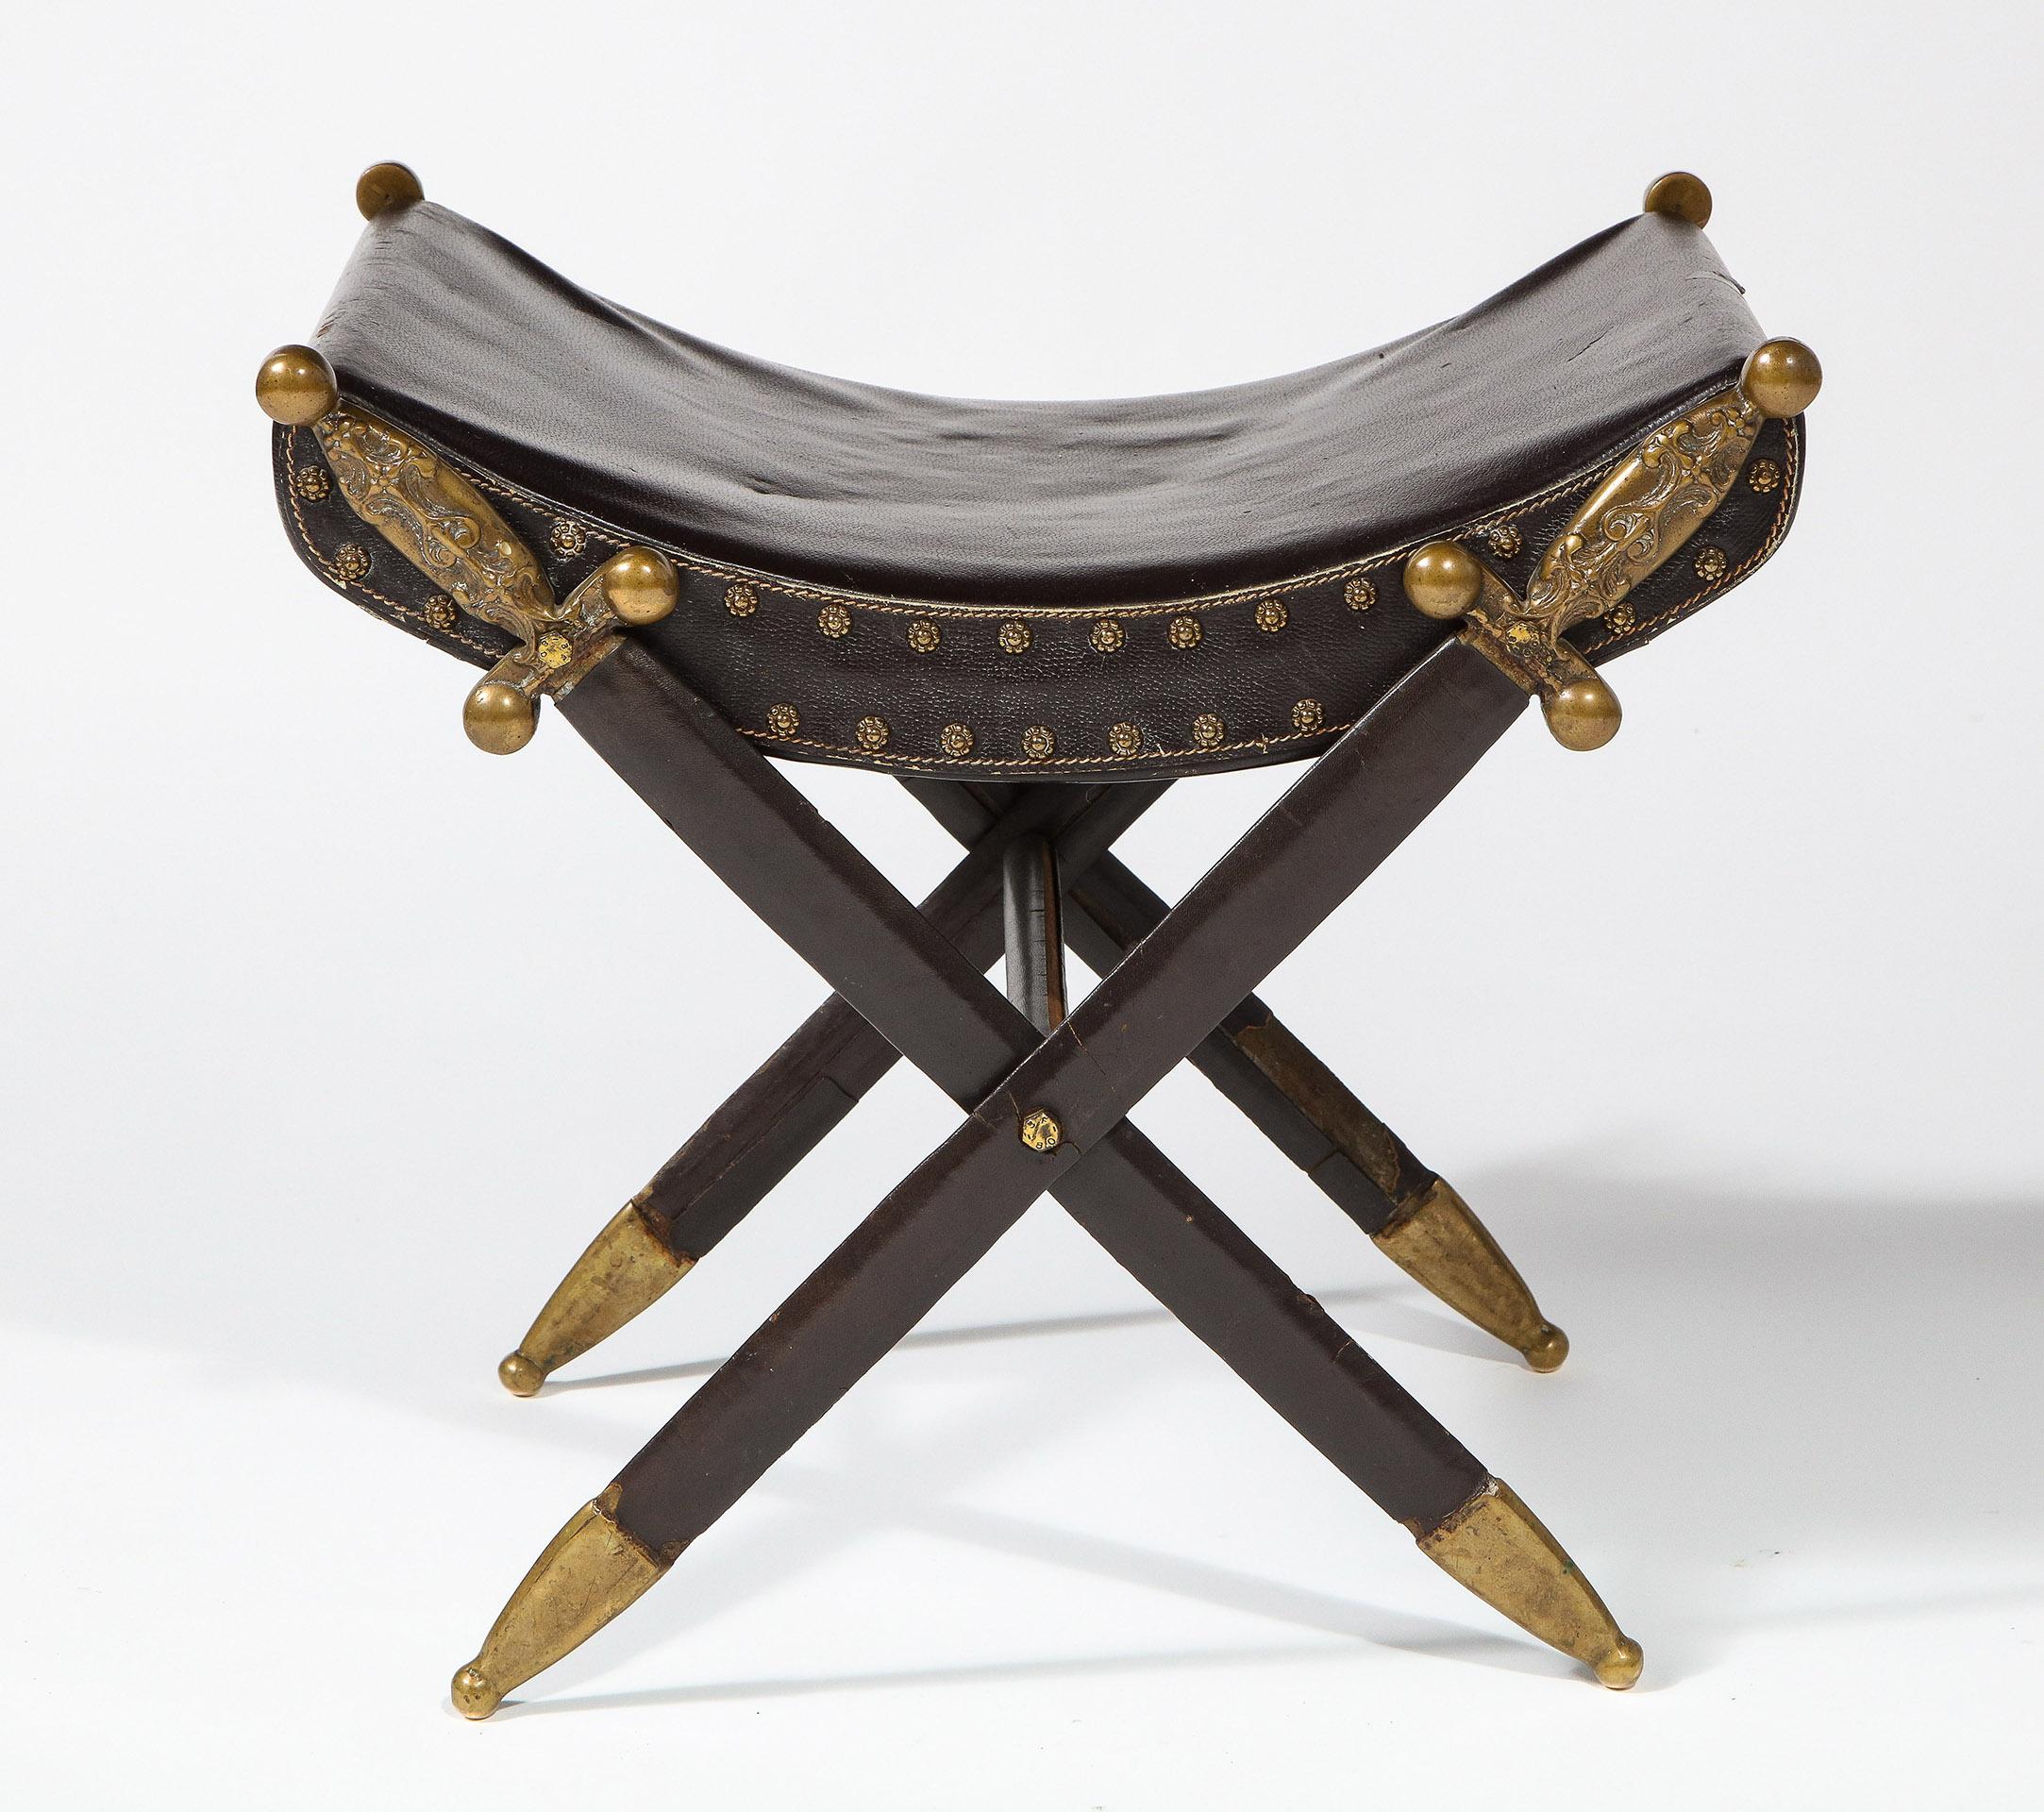 The bench with a patent leather seat and brass rosette nailheads supported by crossed swords embossed with Fleur de Lis handles and constructed of steel and brass.